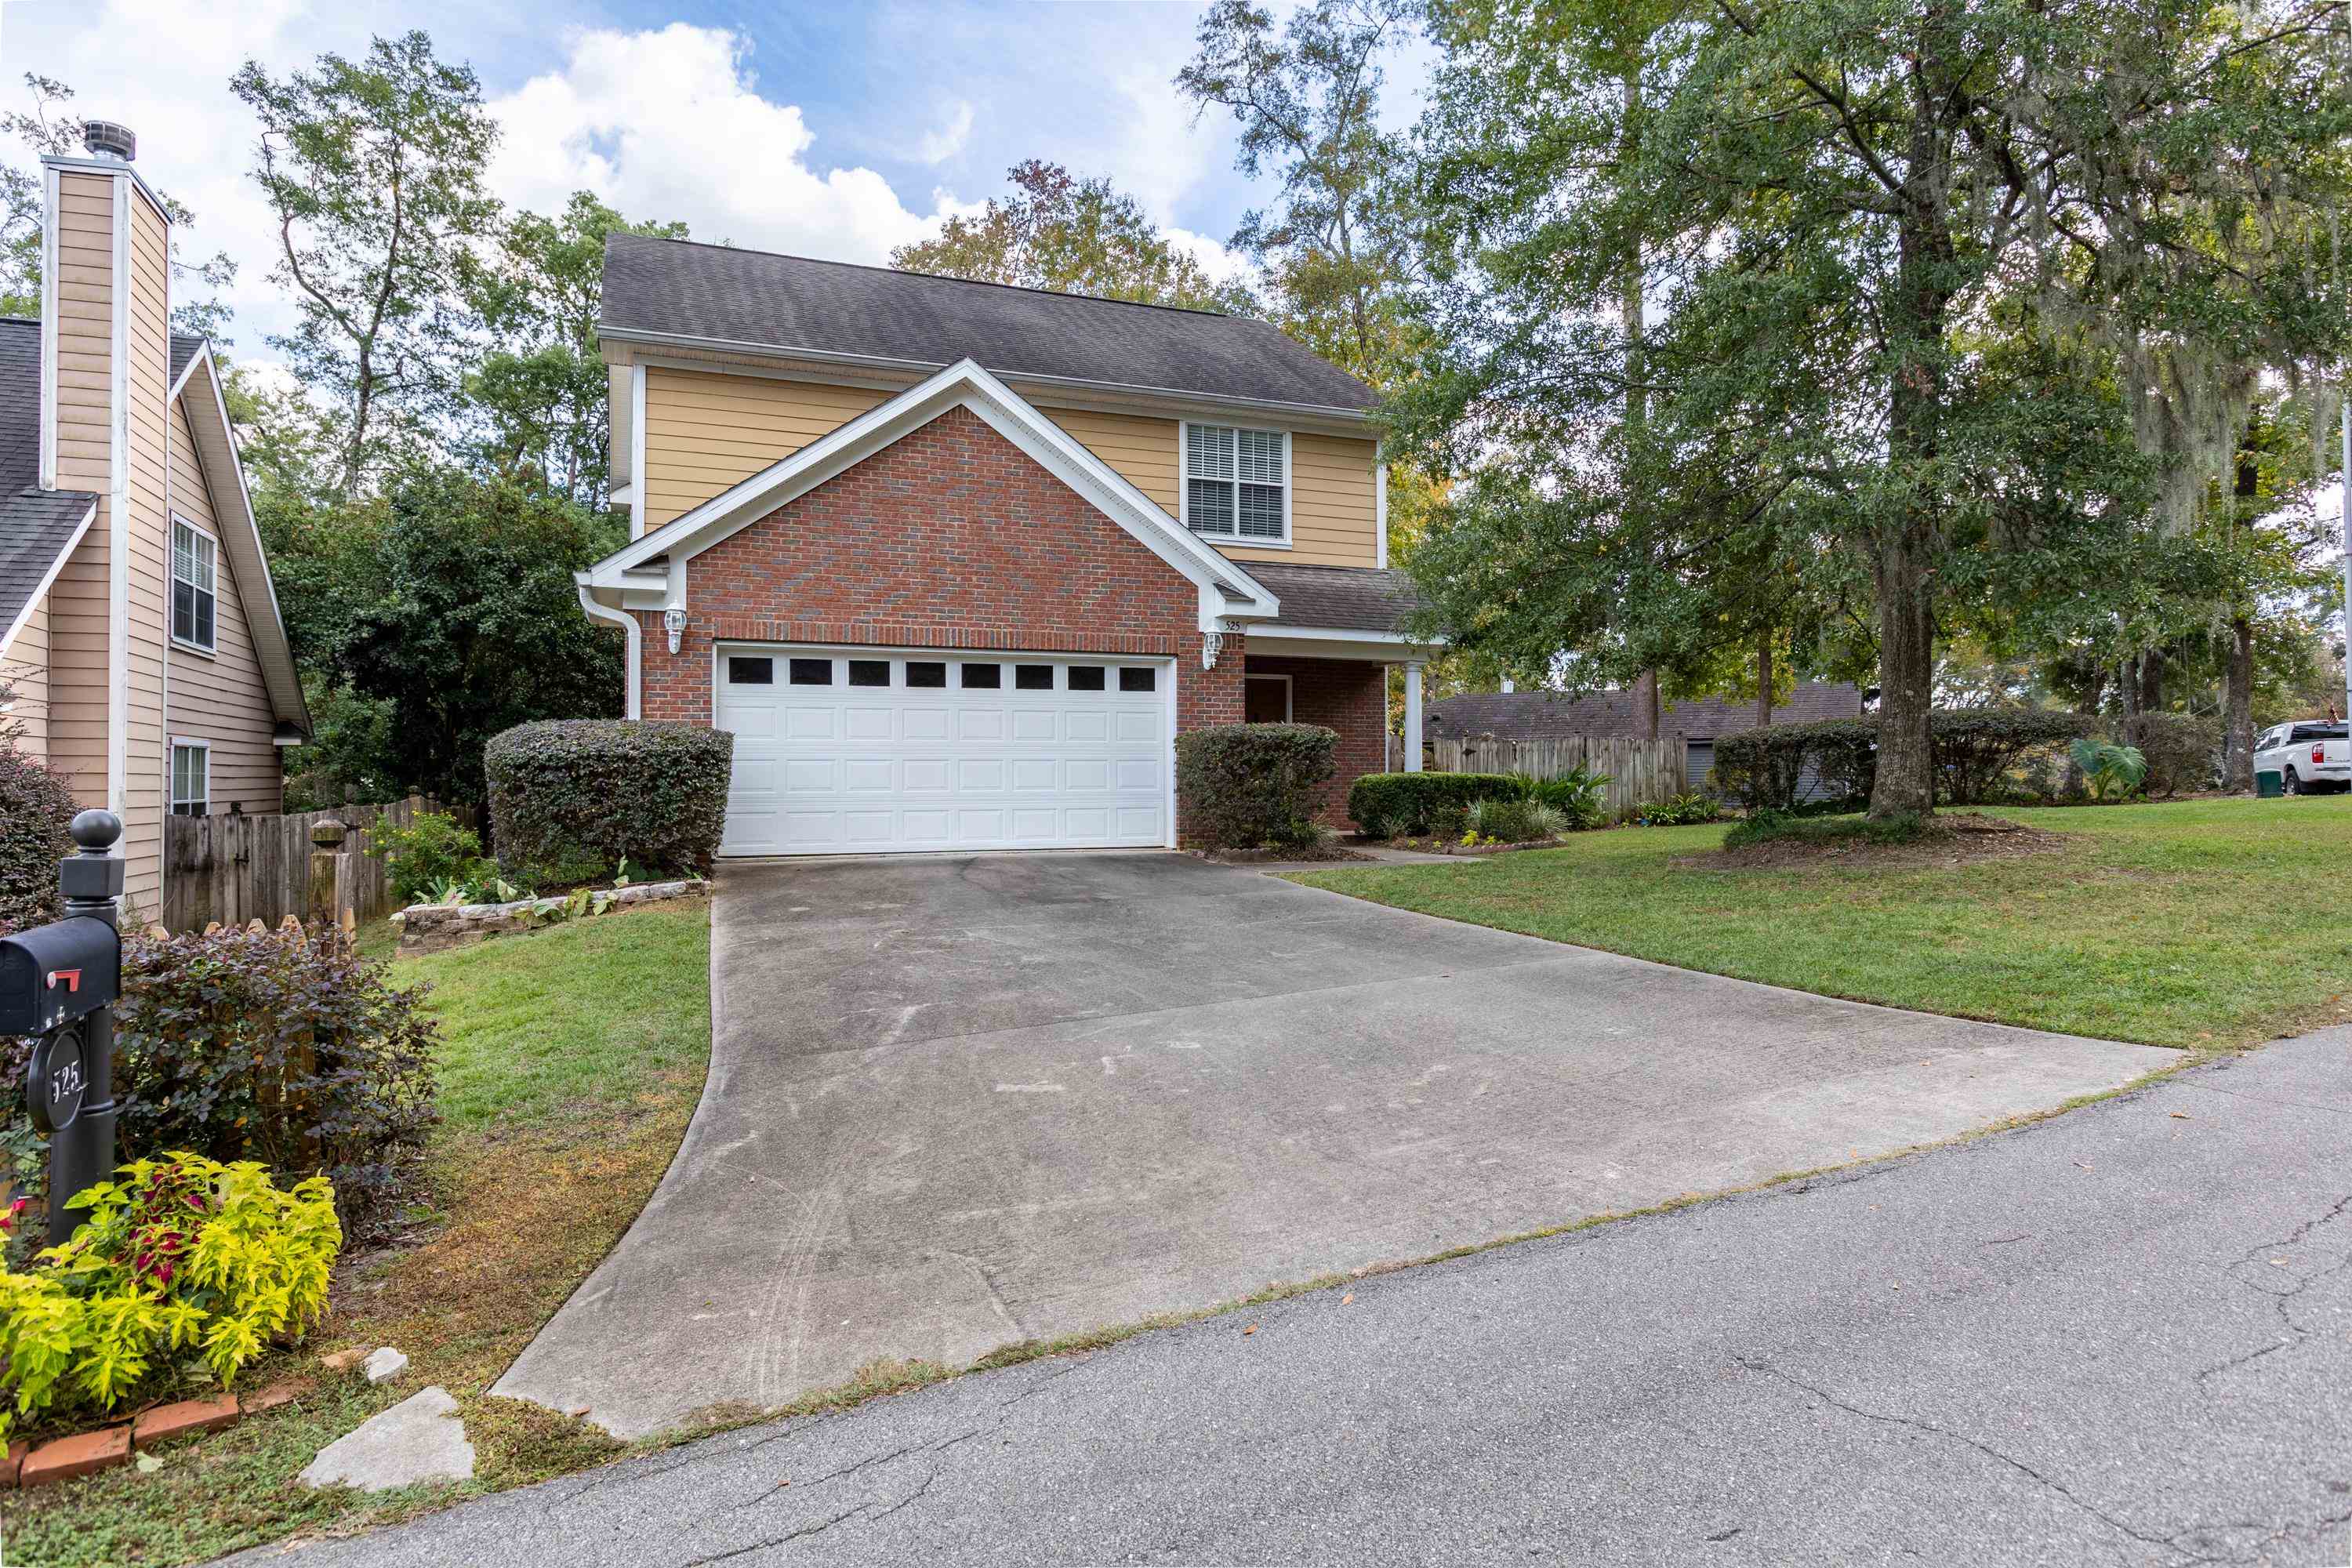 525 Forest Green Drive,TALLAHASSEE,Florida 32308,3 Bedrooms Bedrooms,2 BathroomsBathrooms,Detached single family,525 Forest Green Drive,369678